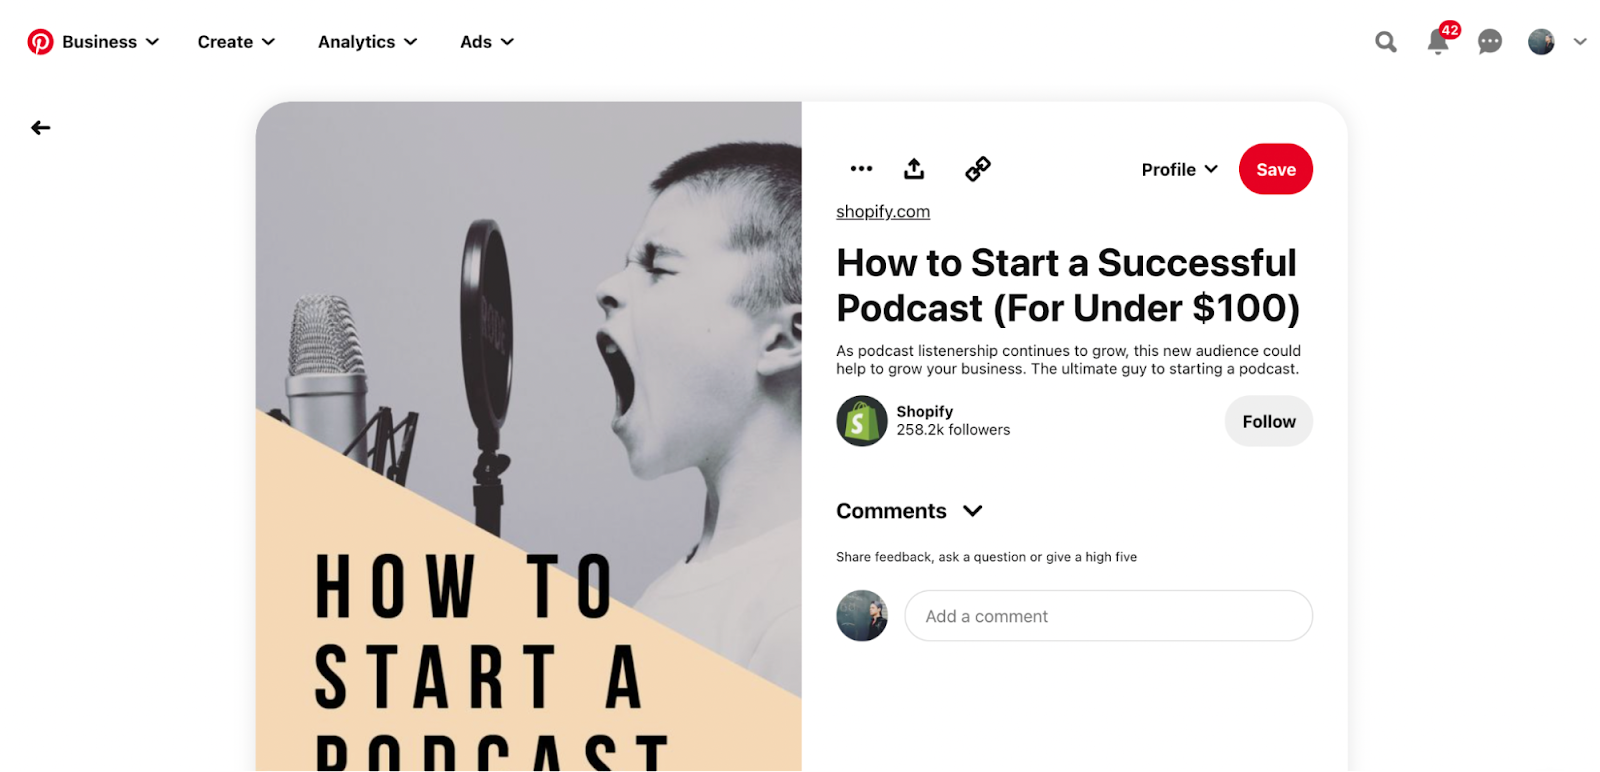 Shopify's "How To Start A Podcast" pin is well optimized for search